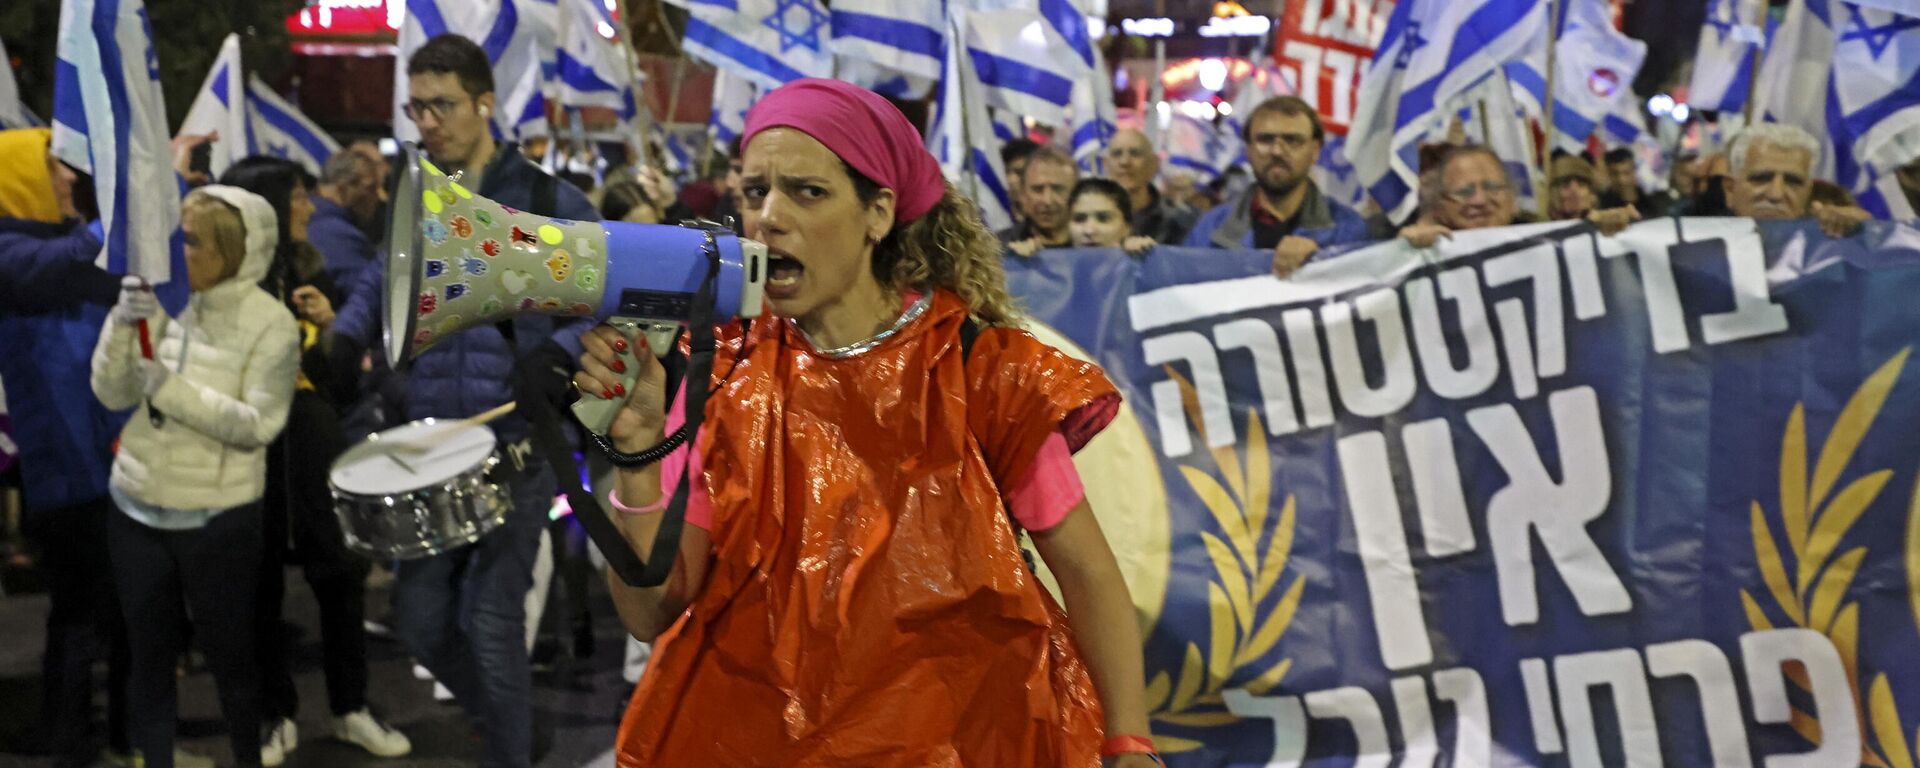 Protesters gather during a rally against the government's controversial judicial overhaul bill in Haifa, Israel on March 18, 2023. - Sputnik International, 1920, 29.03.2023